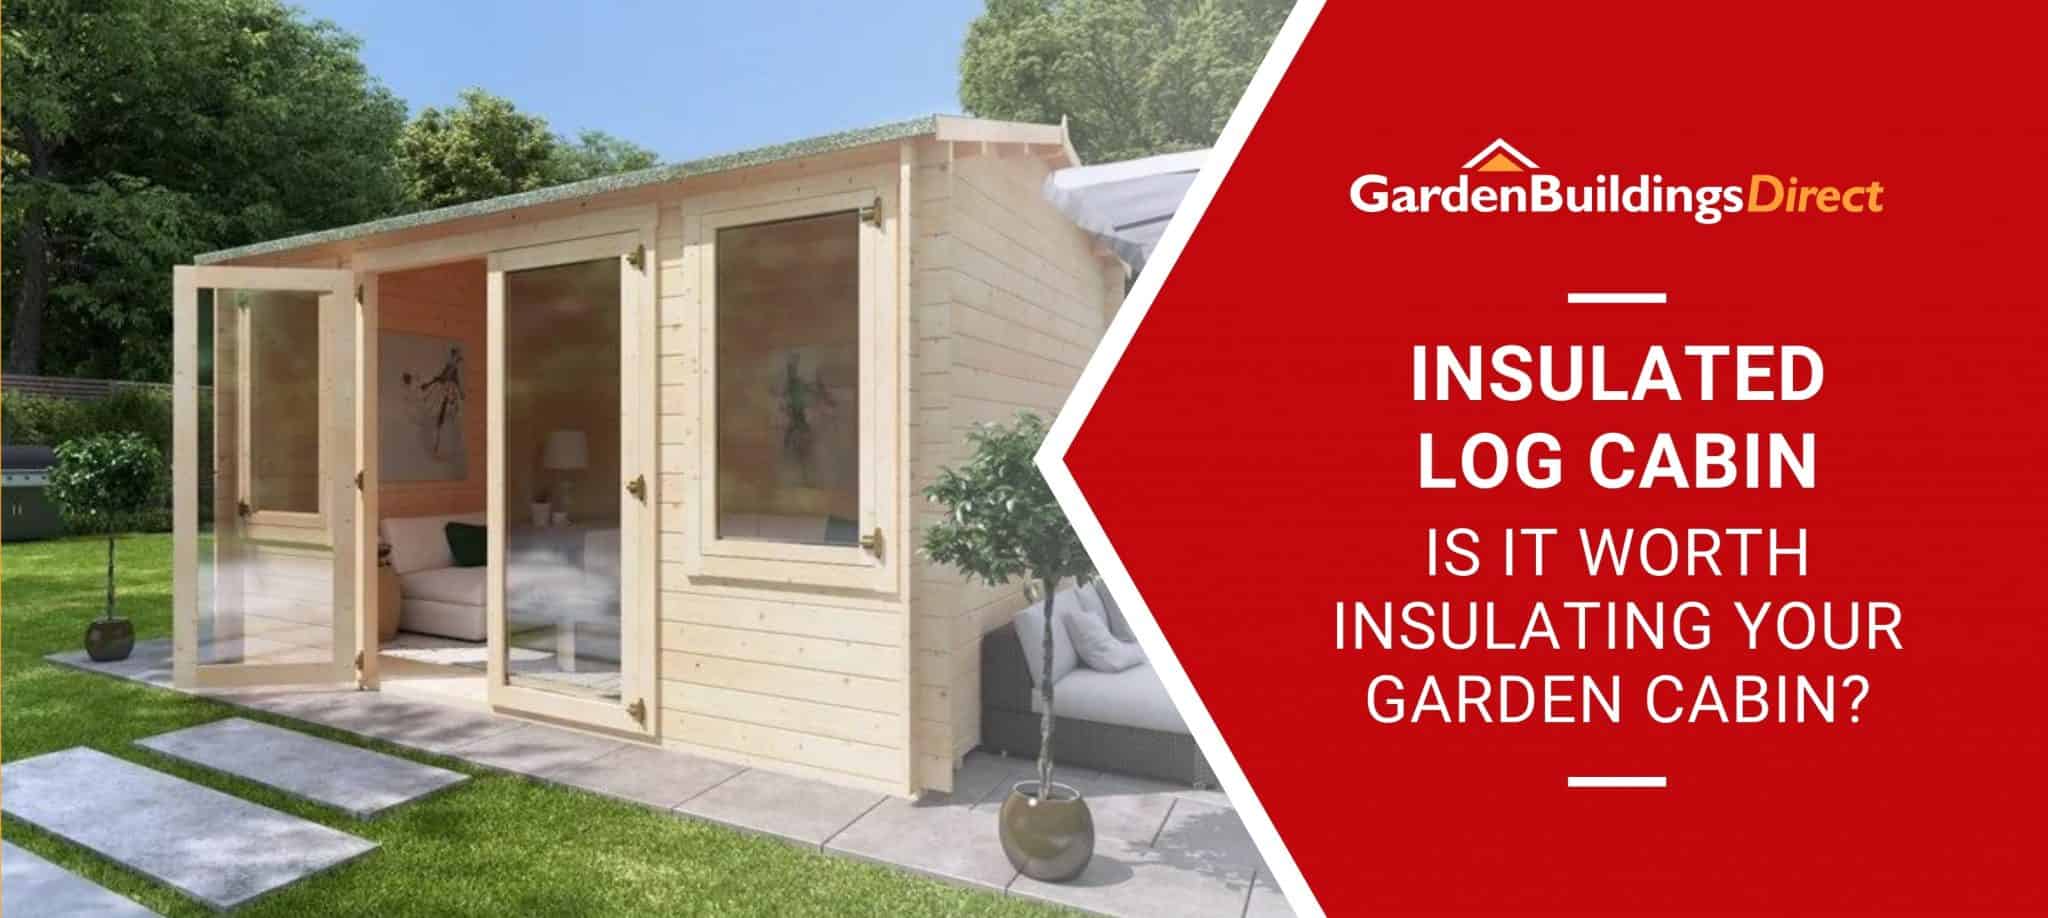 'Is It Worth Insulating Your Garden Cabin' with a log cabin on a patio in the background and garden buildings direct logo on a red arrow banner